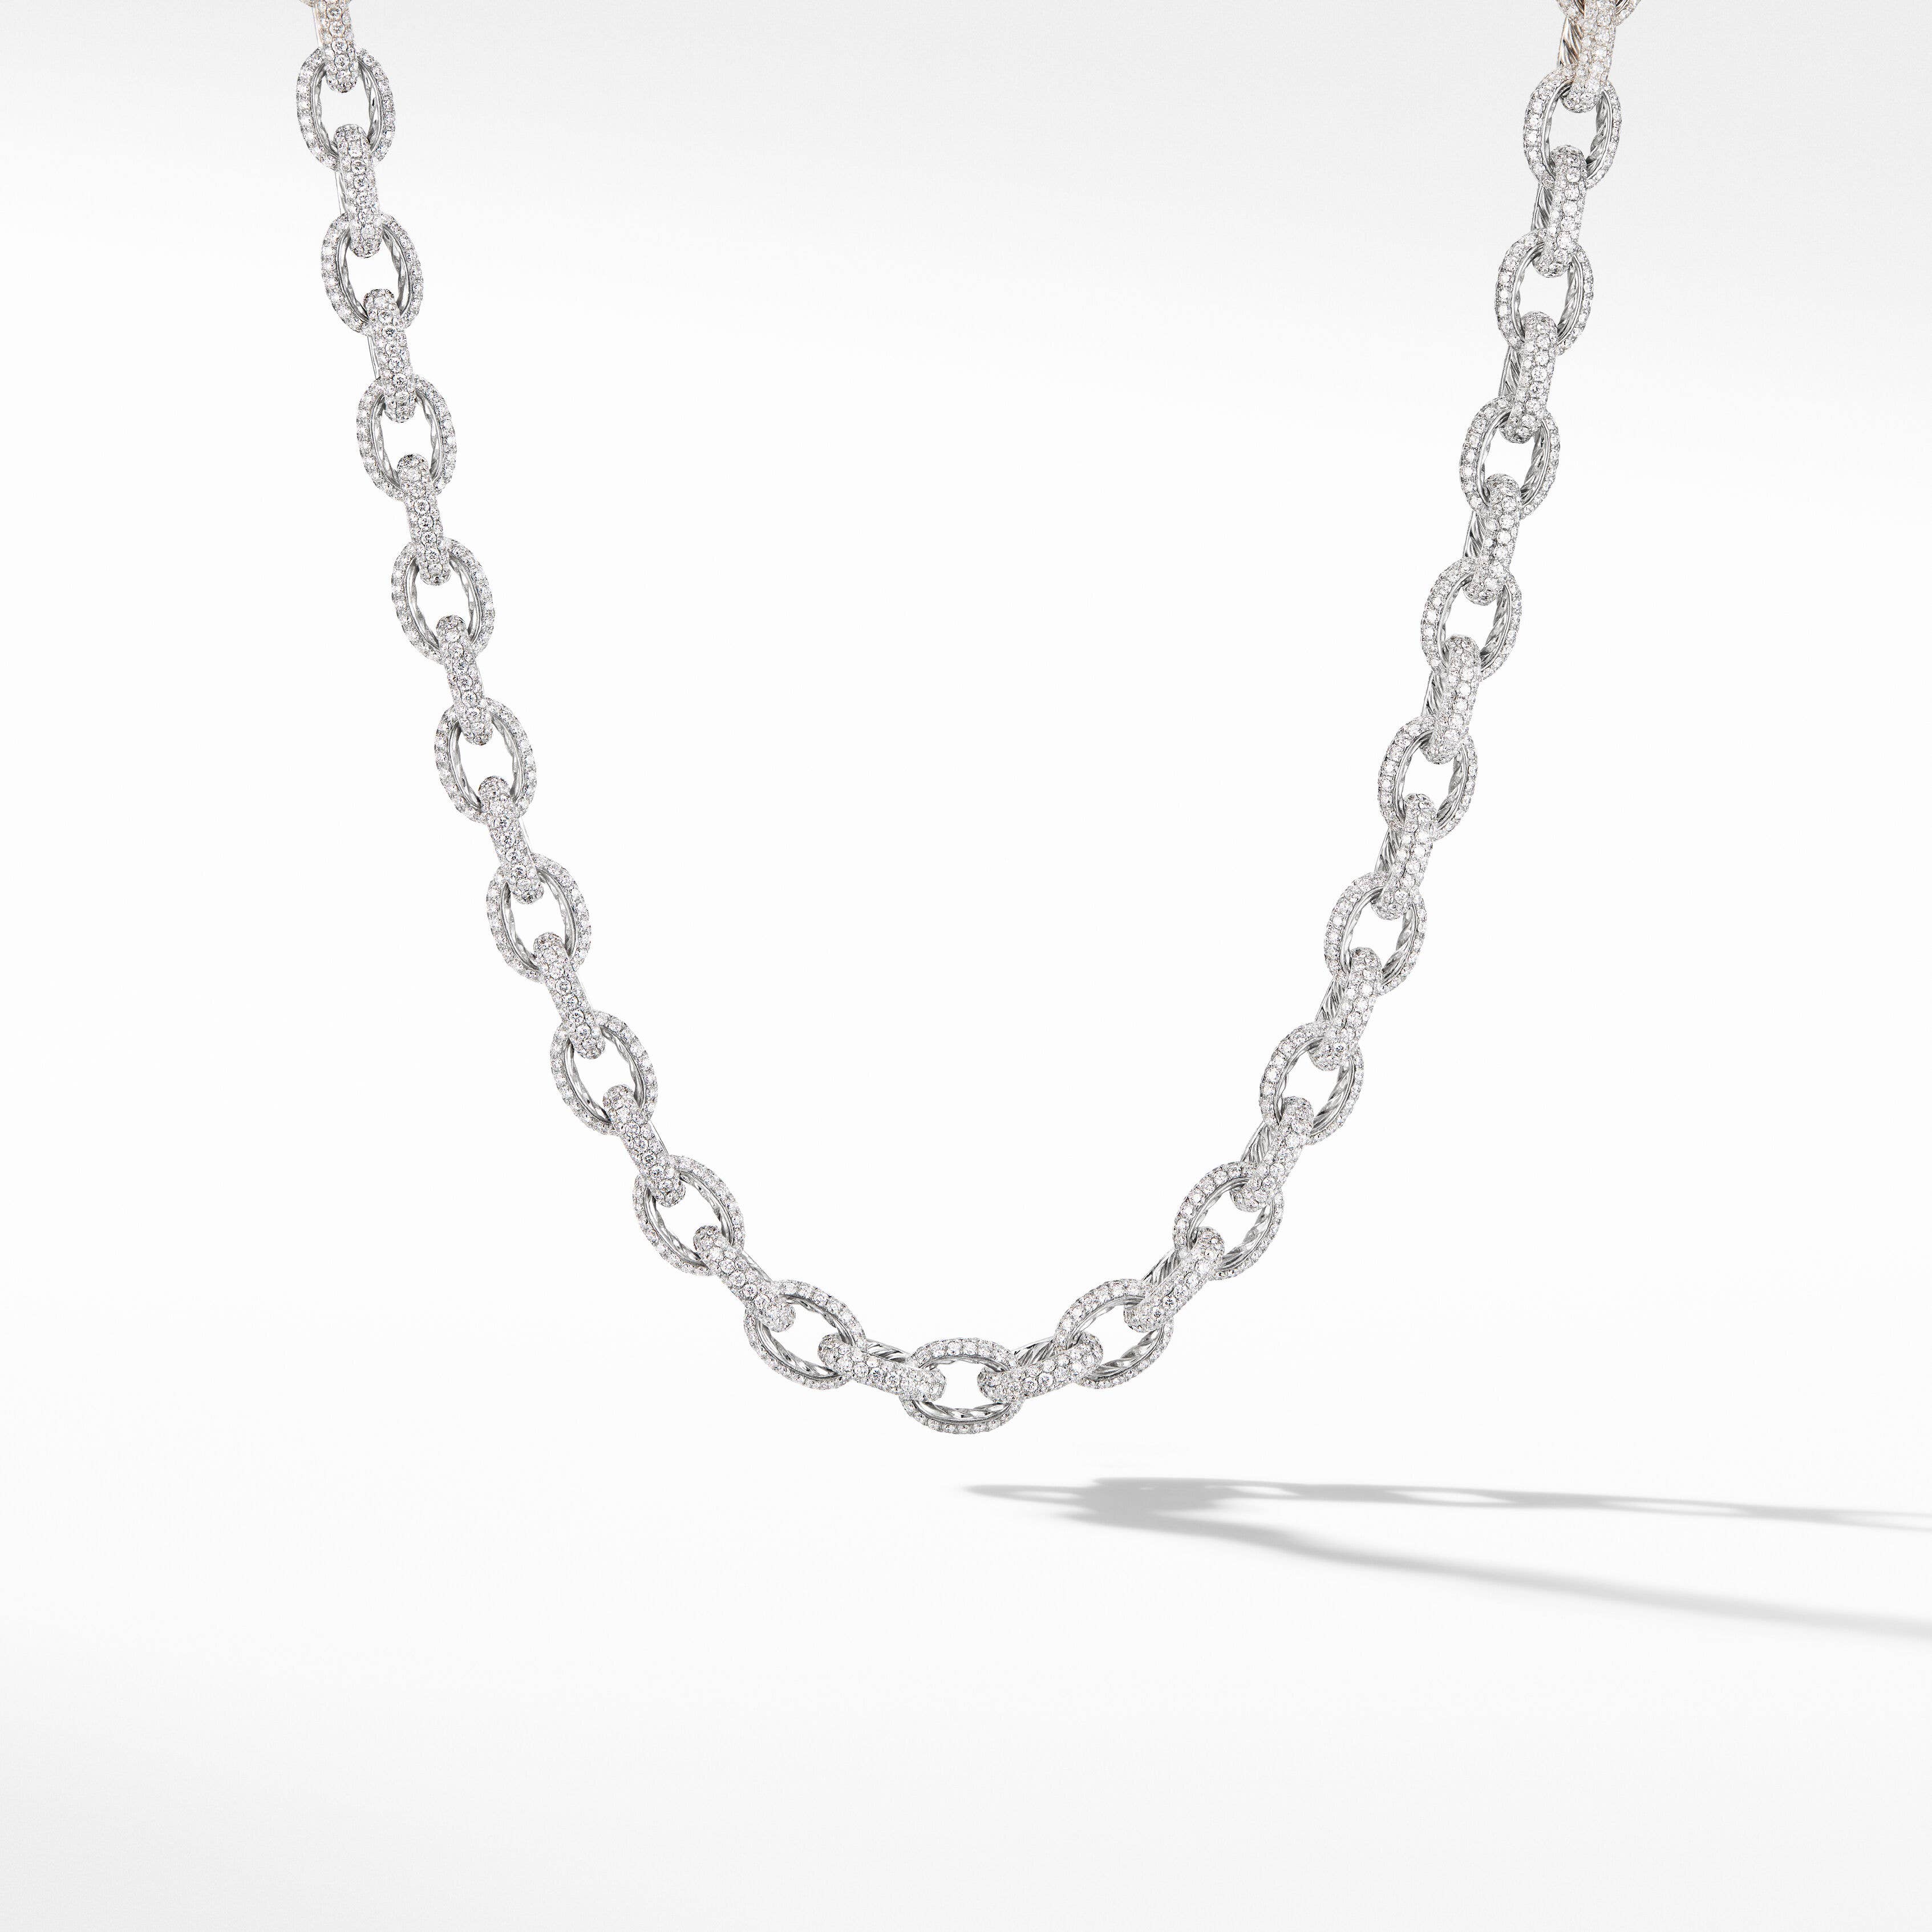 Pavé Chain Necklace in White Gold with Diamonds